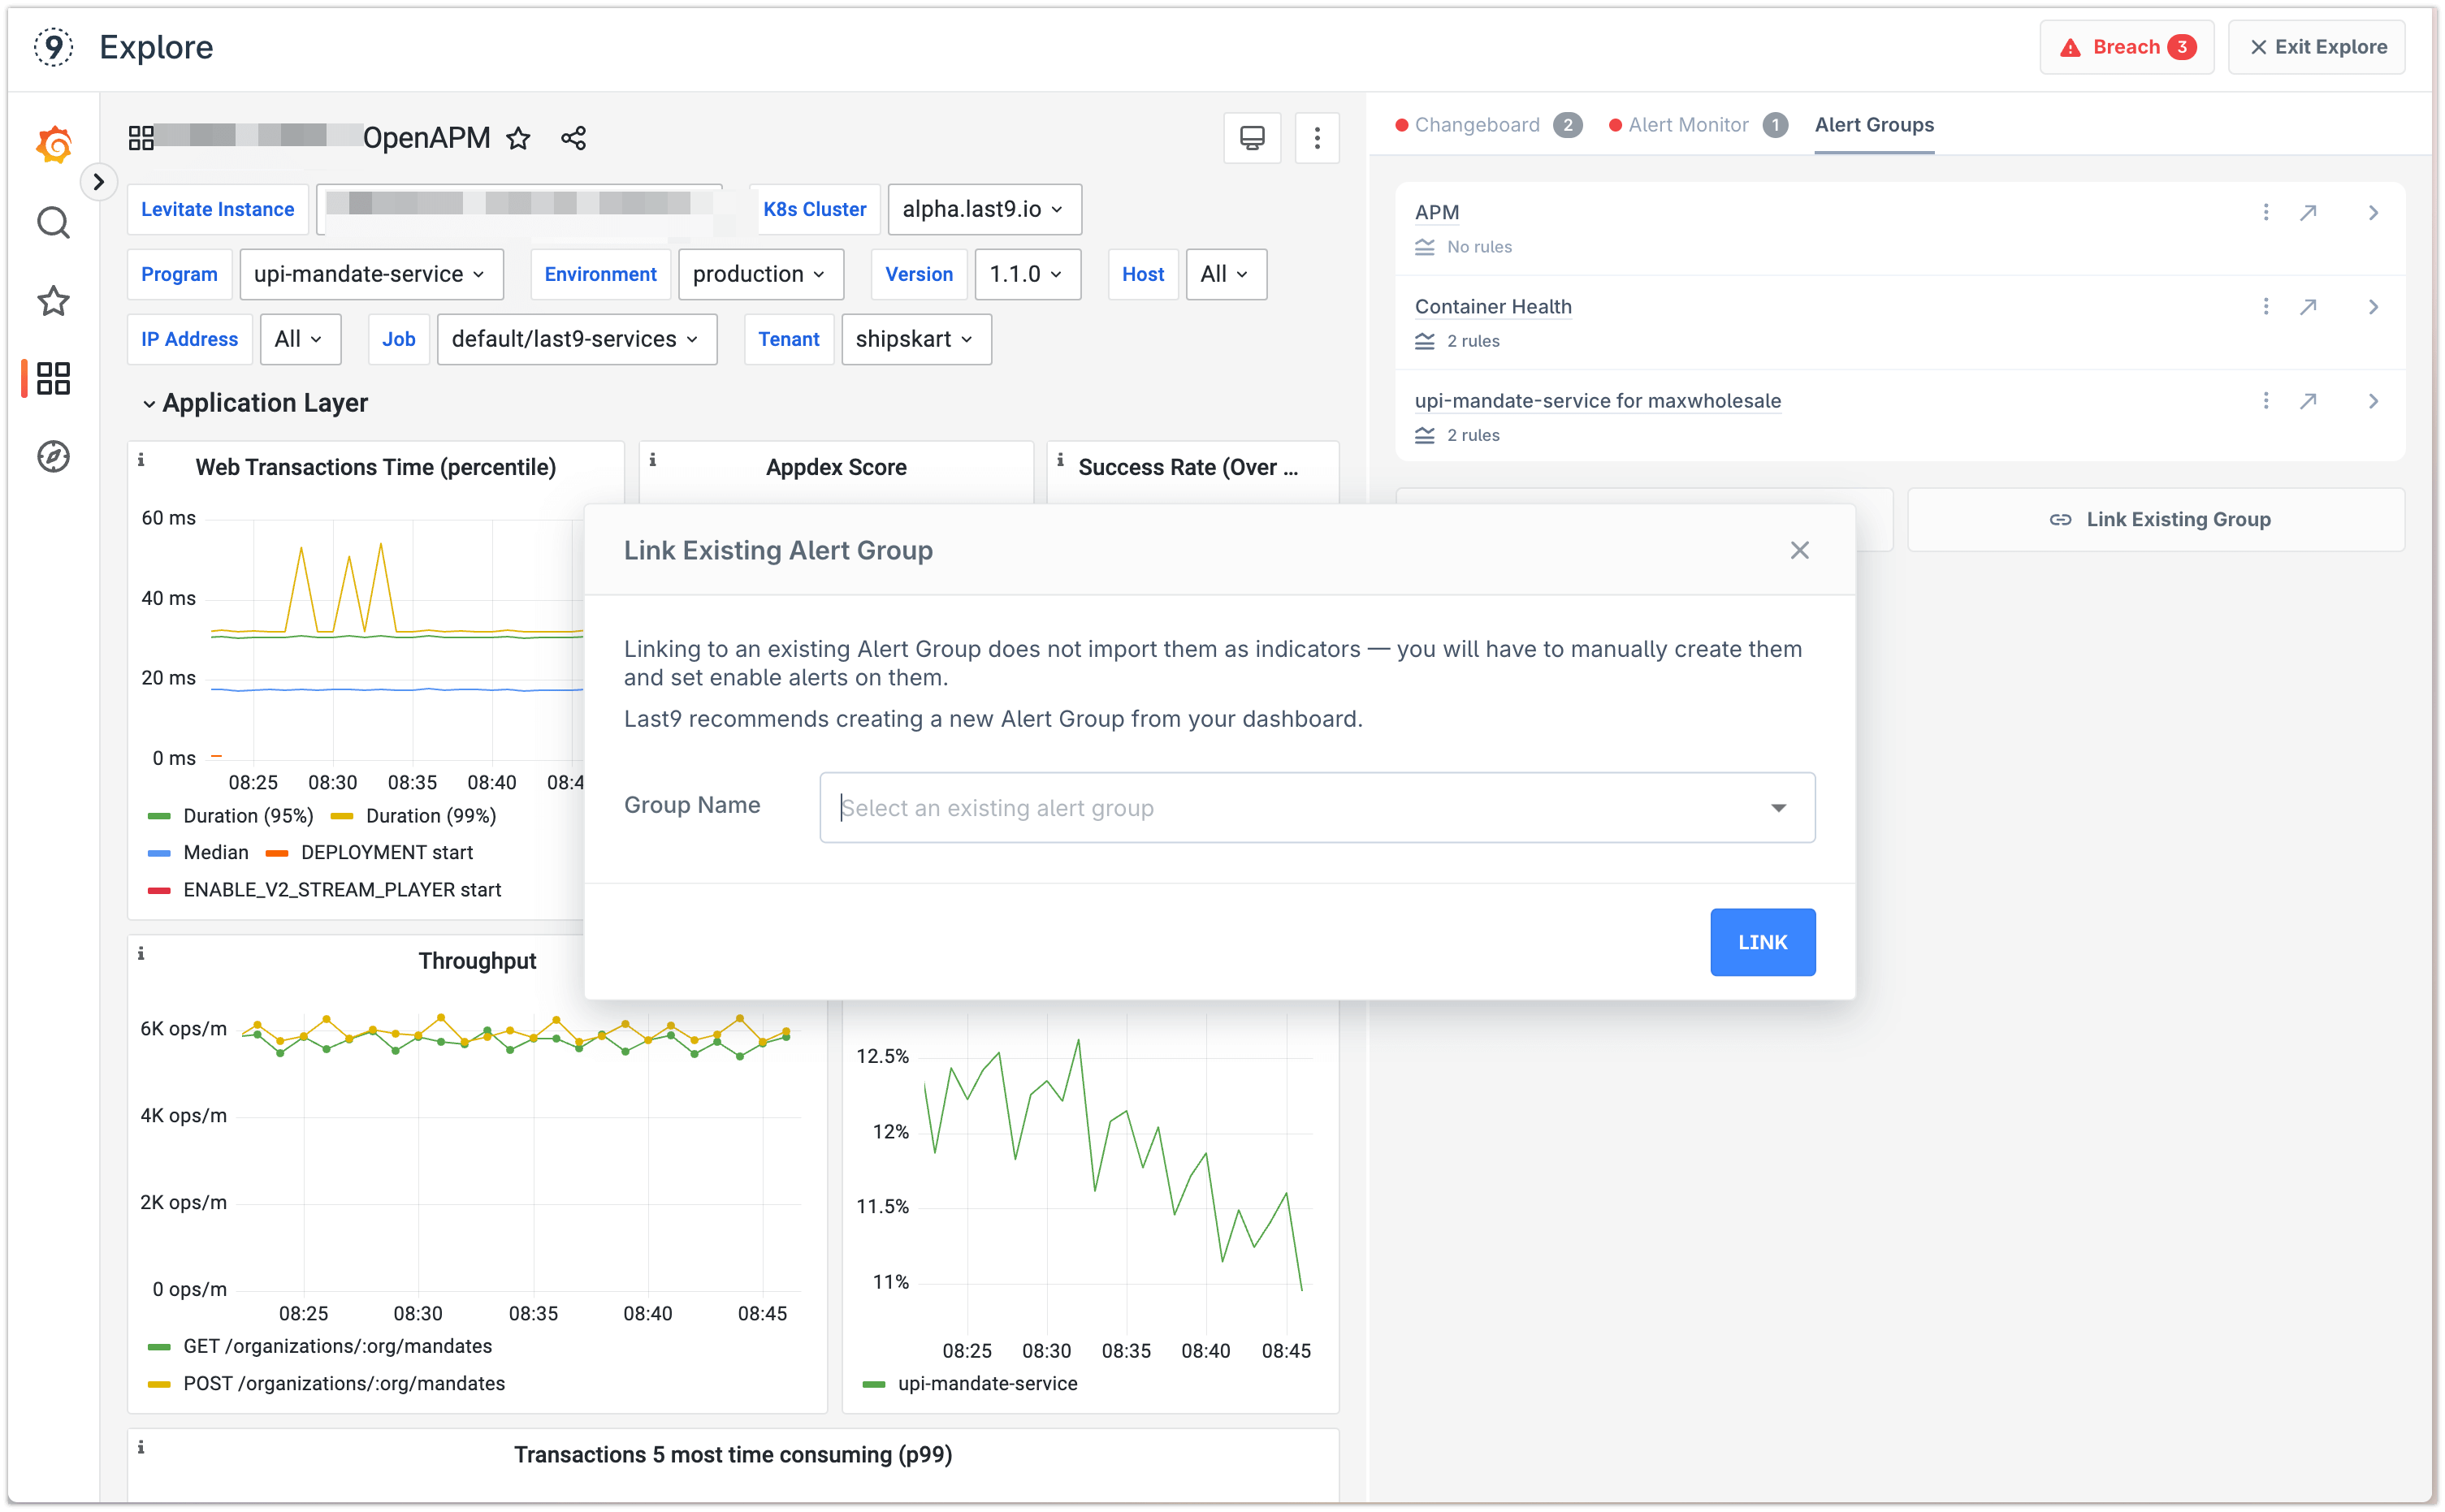 Link an existing alert group to a Dashboard